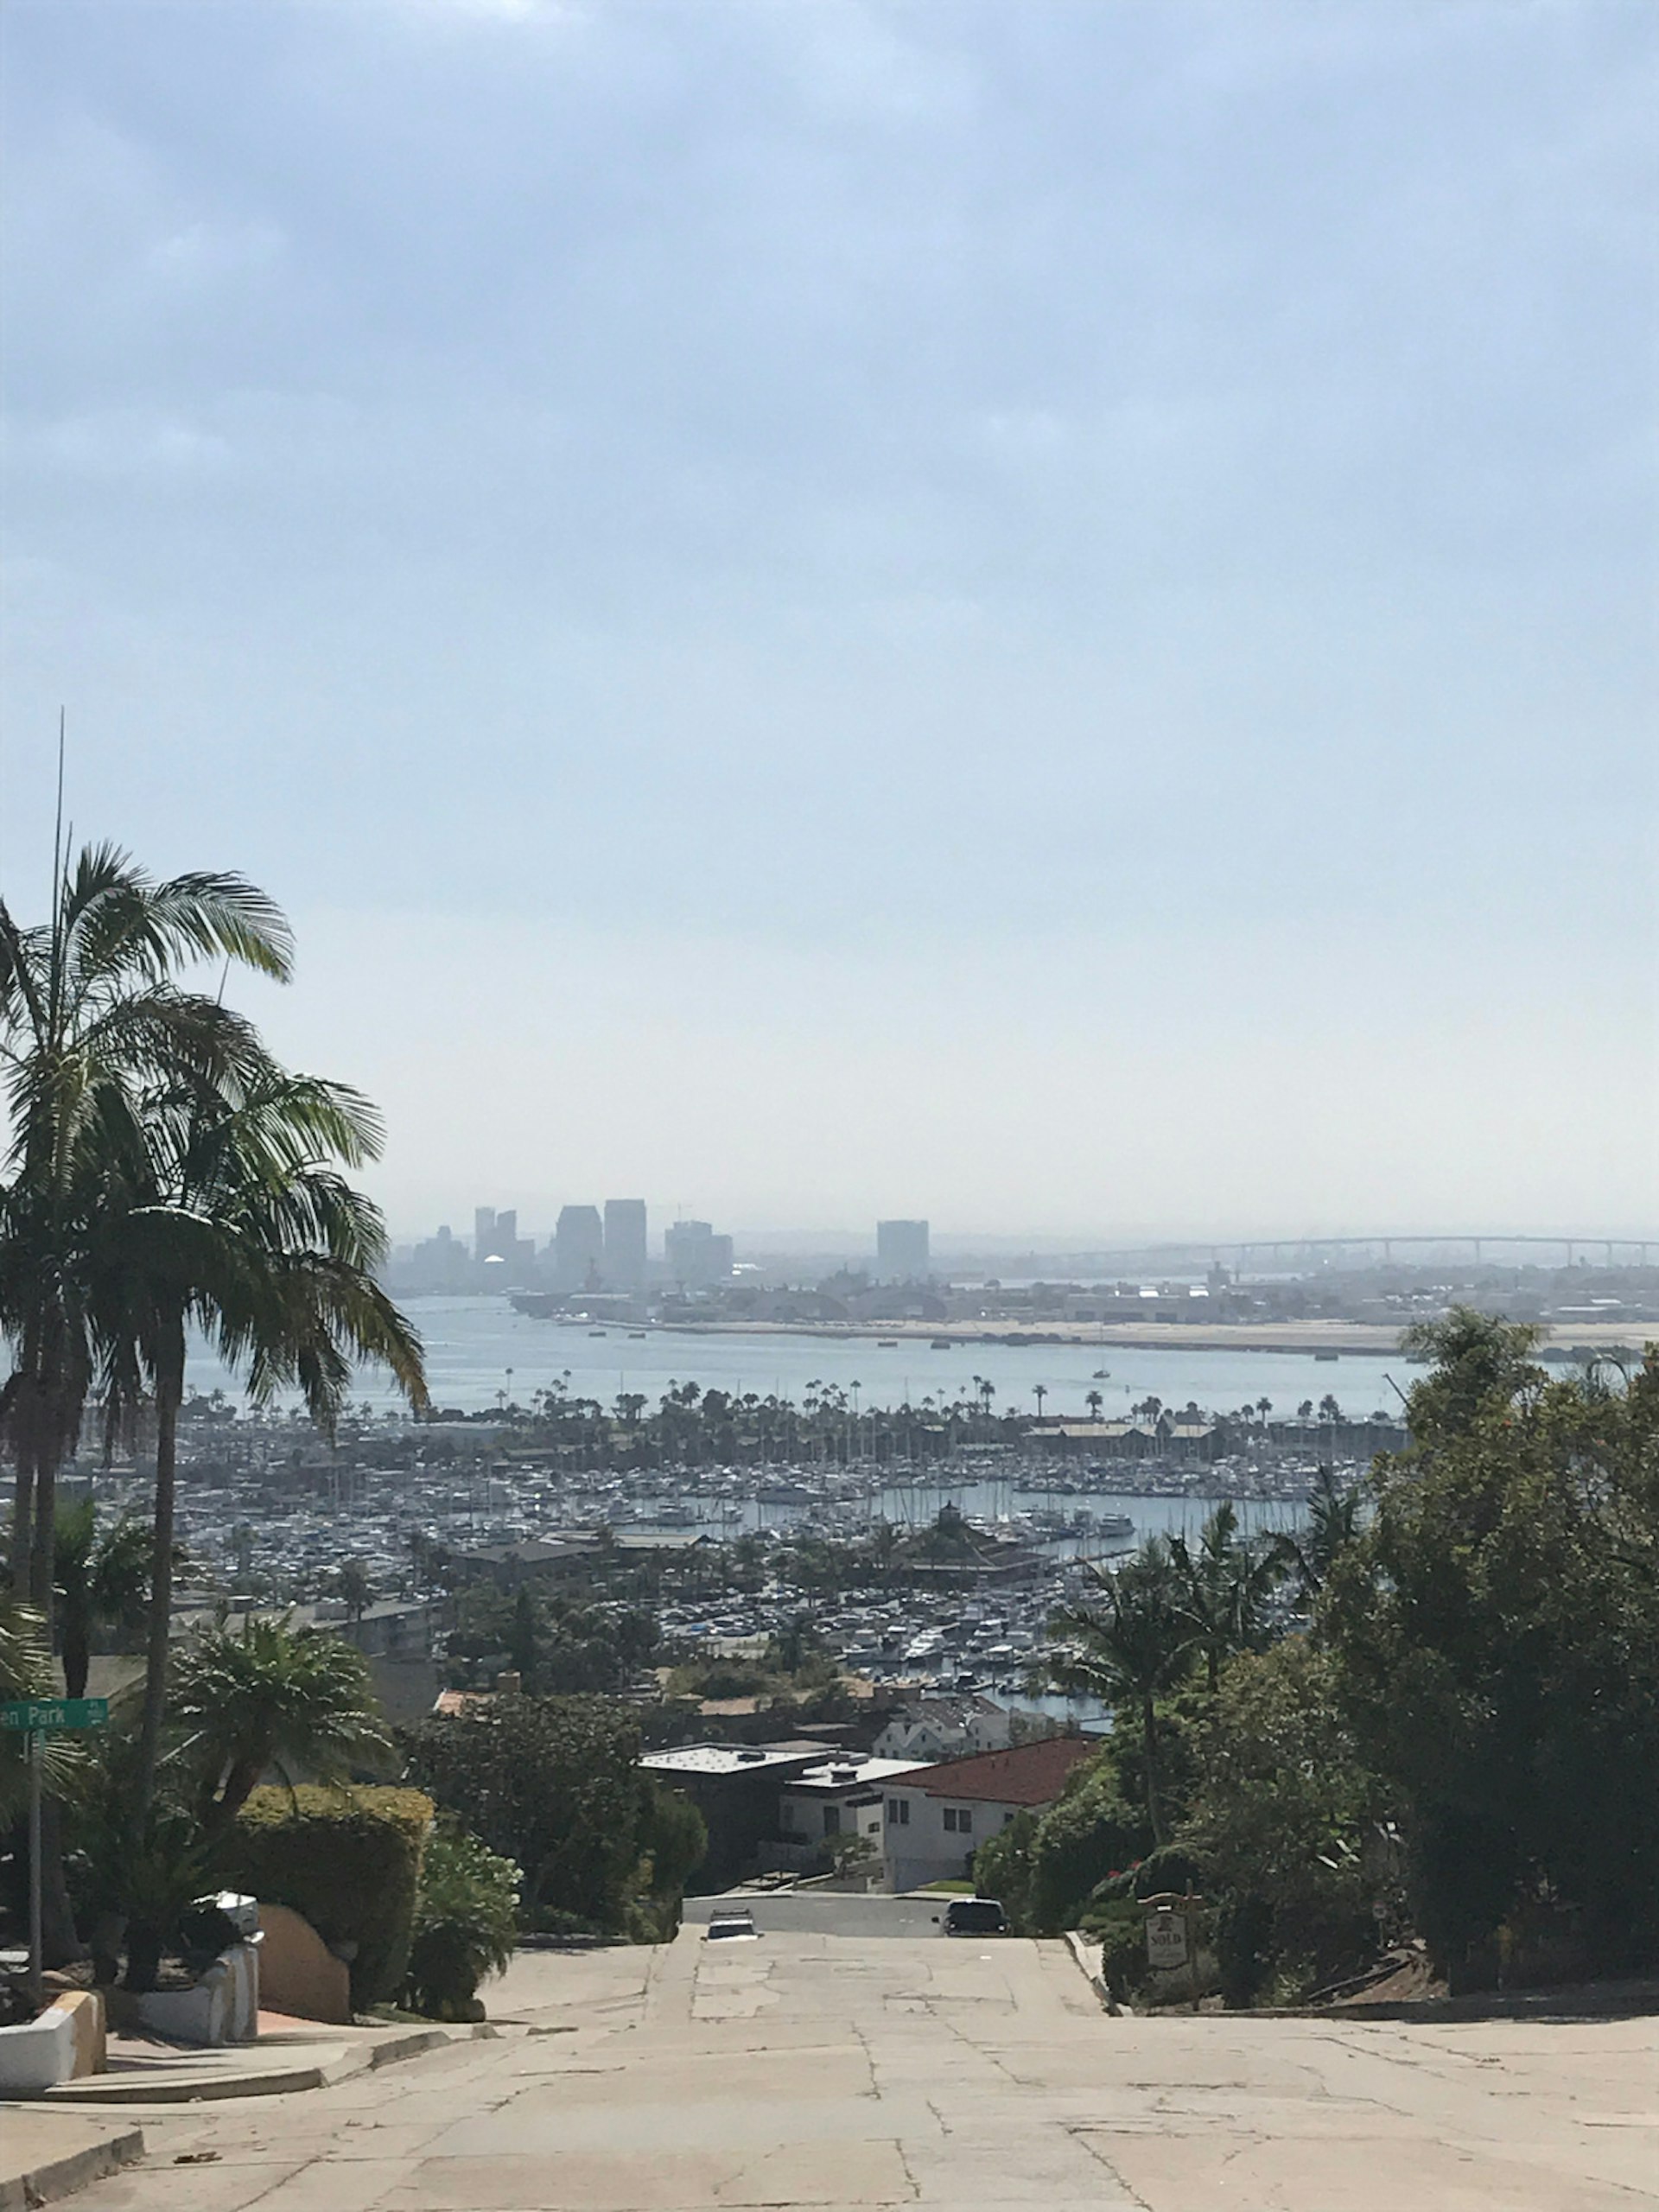 Point Loma offers good food, historic monuments and views of San Diego Bay @ Jade Bremner / Lonely Planet